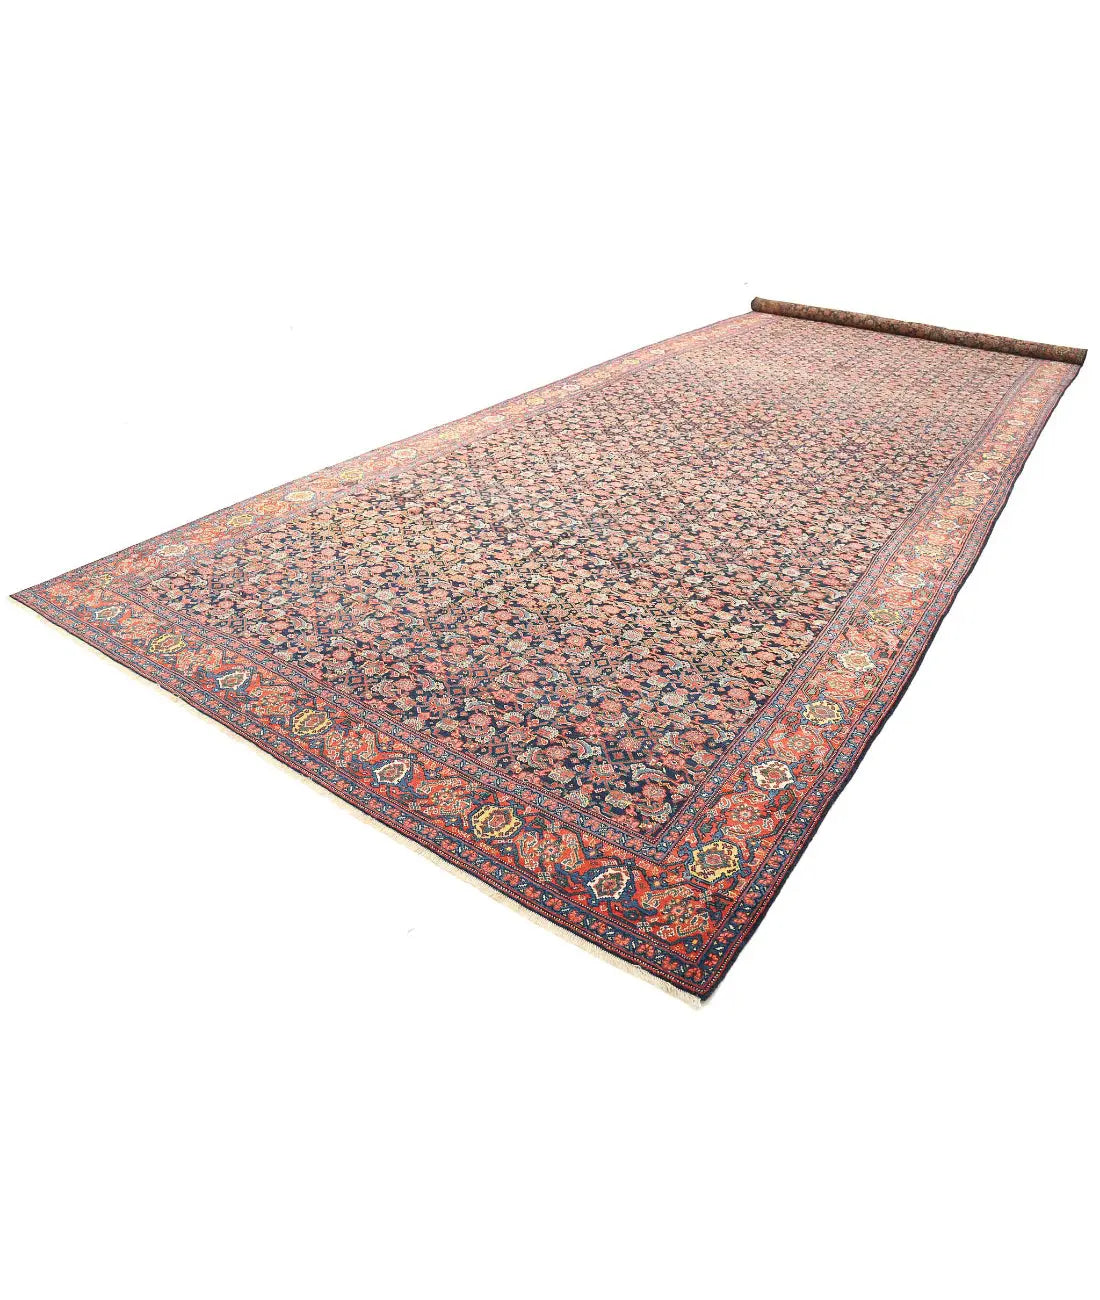 Hand Knotted Antique Persian Mahal Wool Rug - 8'10'' x 24'1'' - Arteverk Rugs Area rug